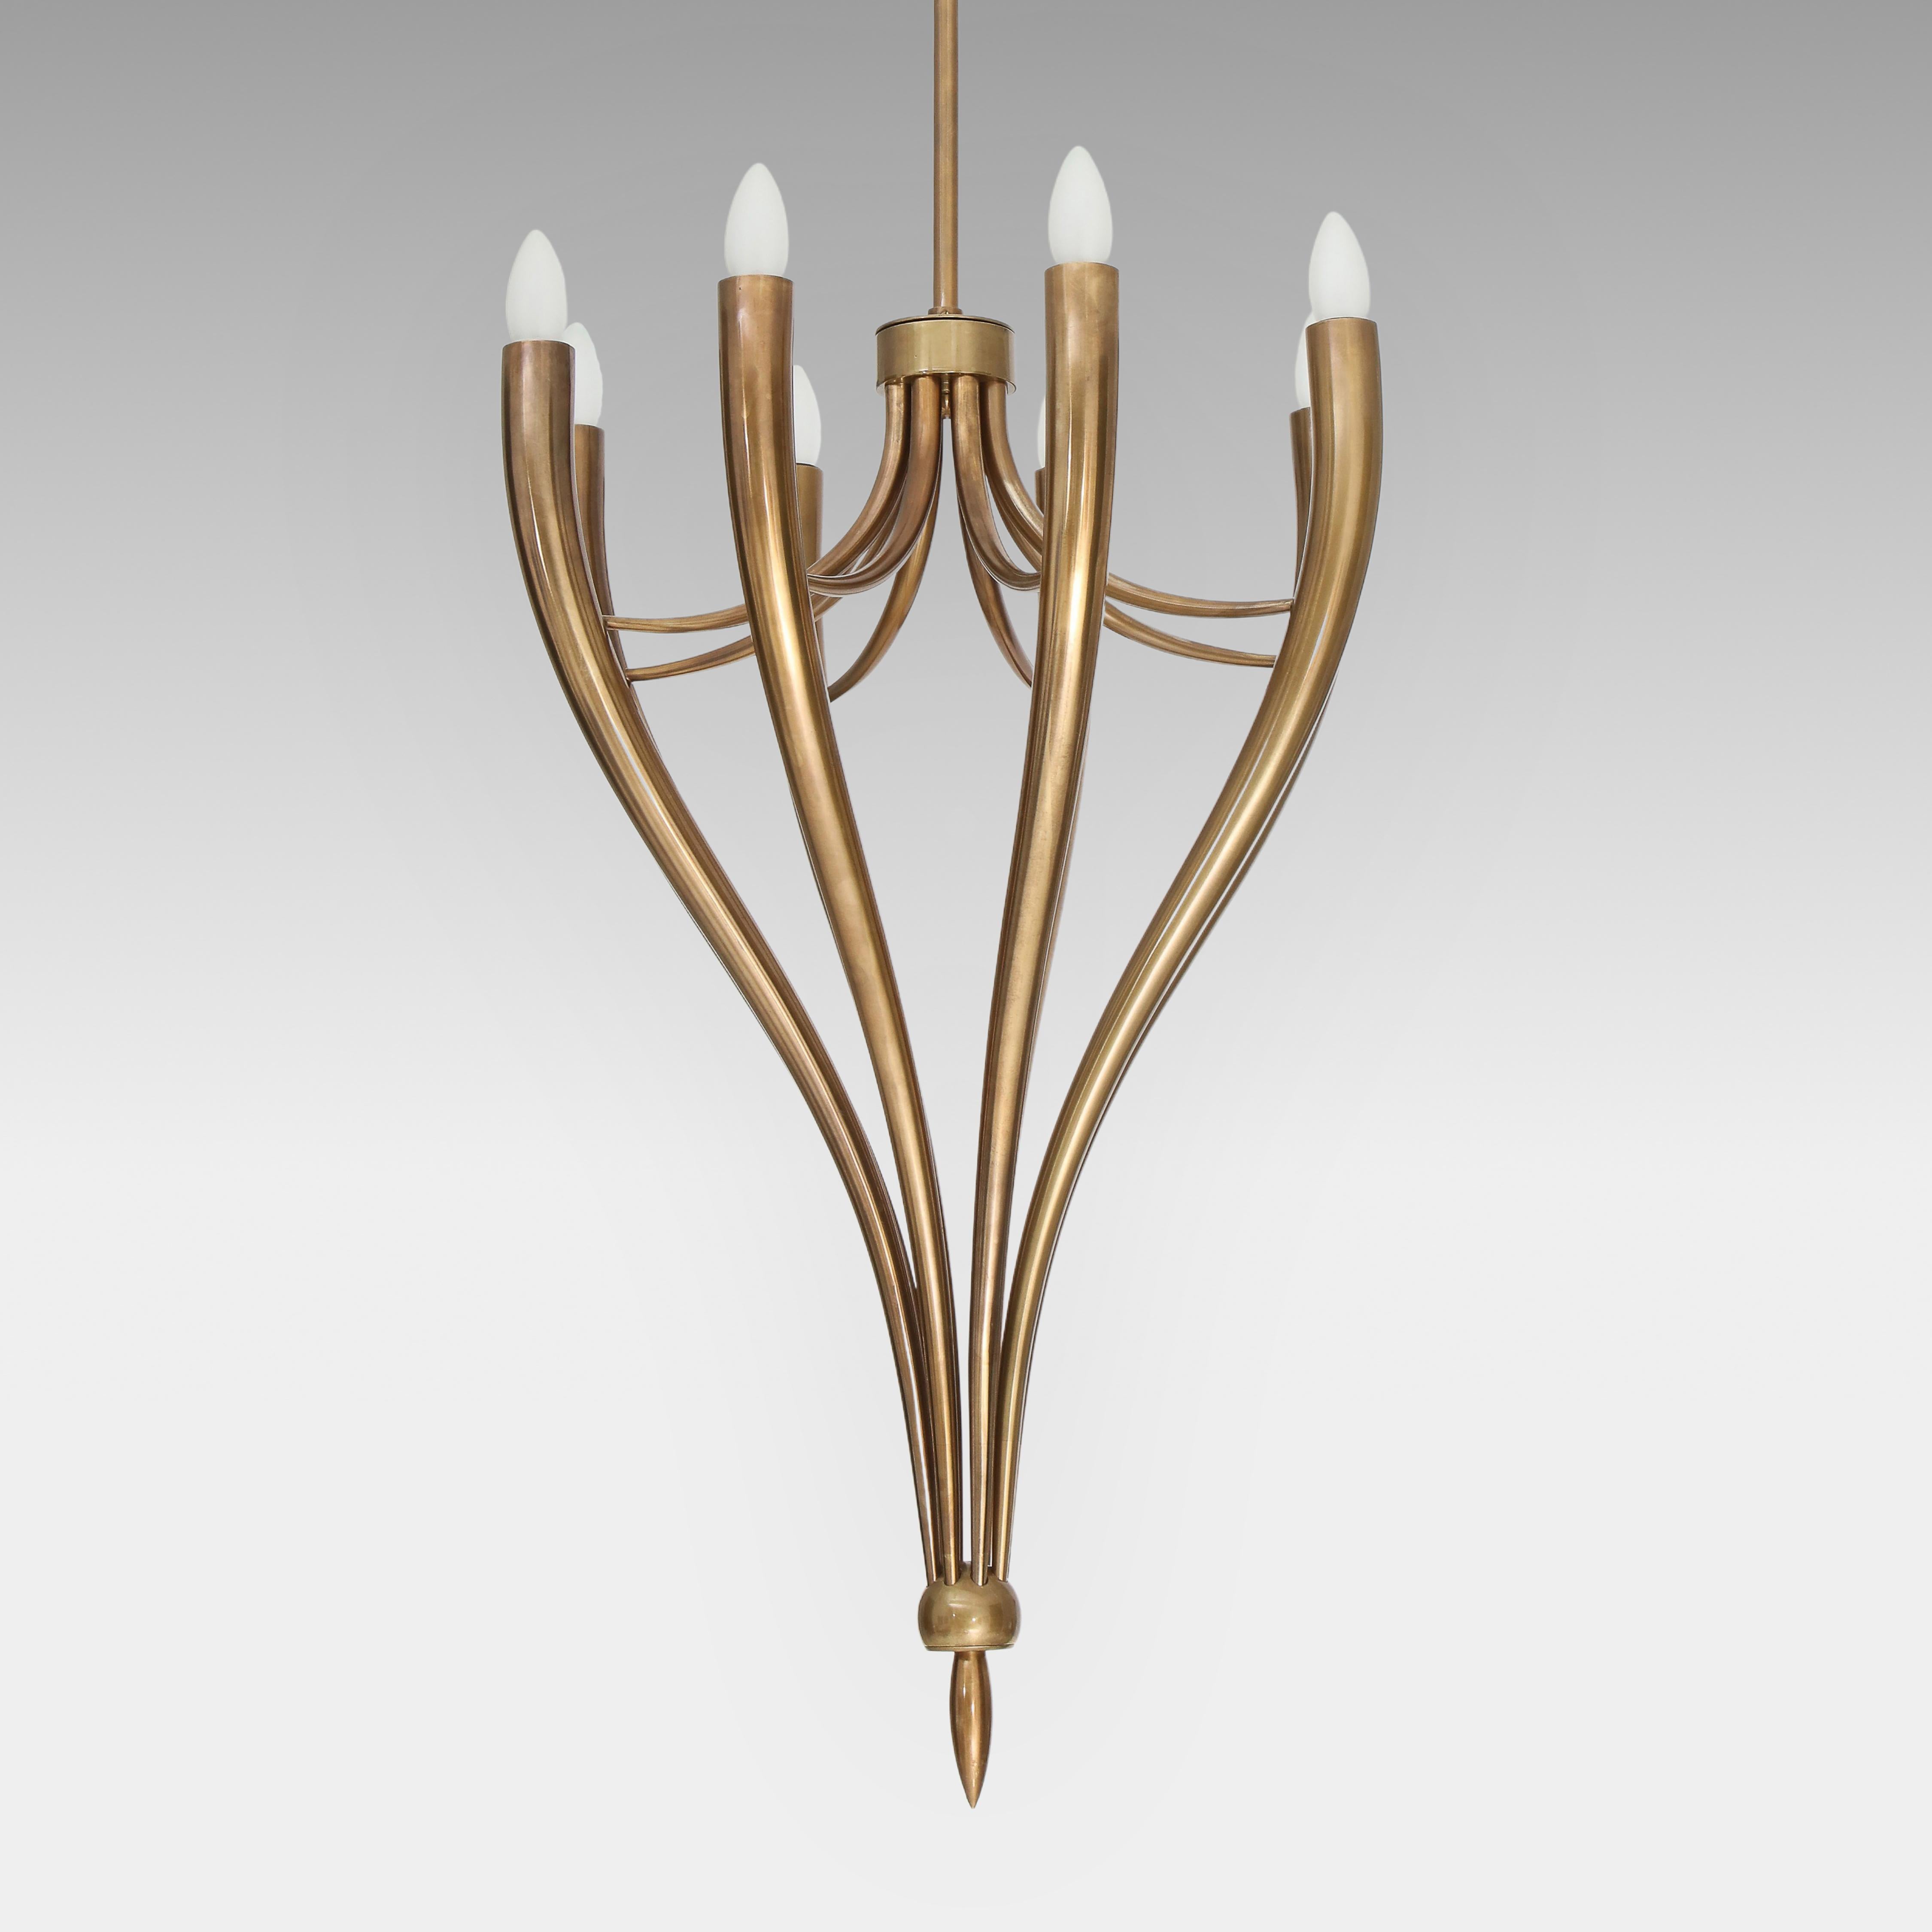 Guglielmo Ulrich Rare Eight-Arm Brass Chandelier, Italy, 1940s In Good Condition For Sale In New York, NY